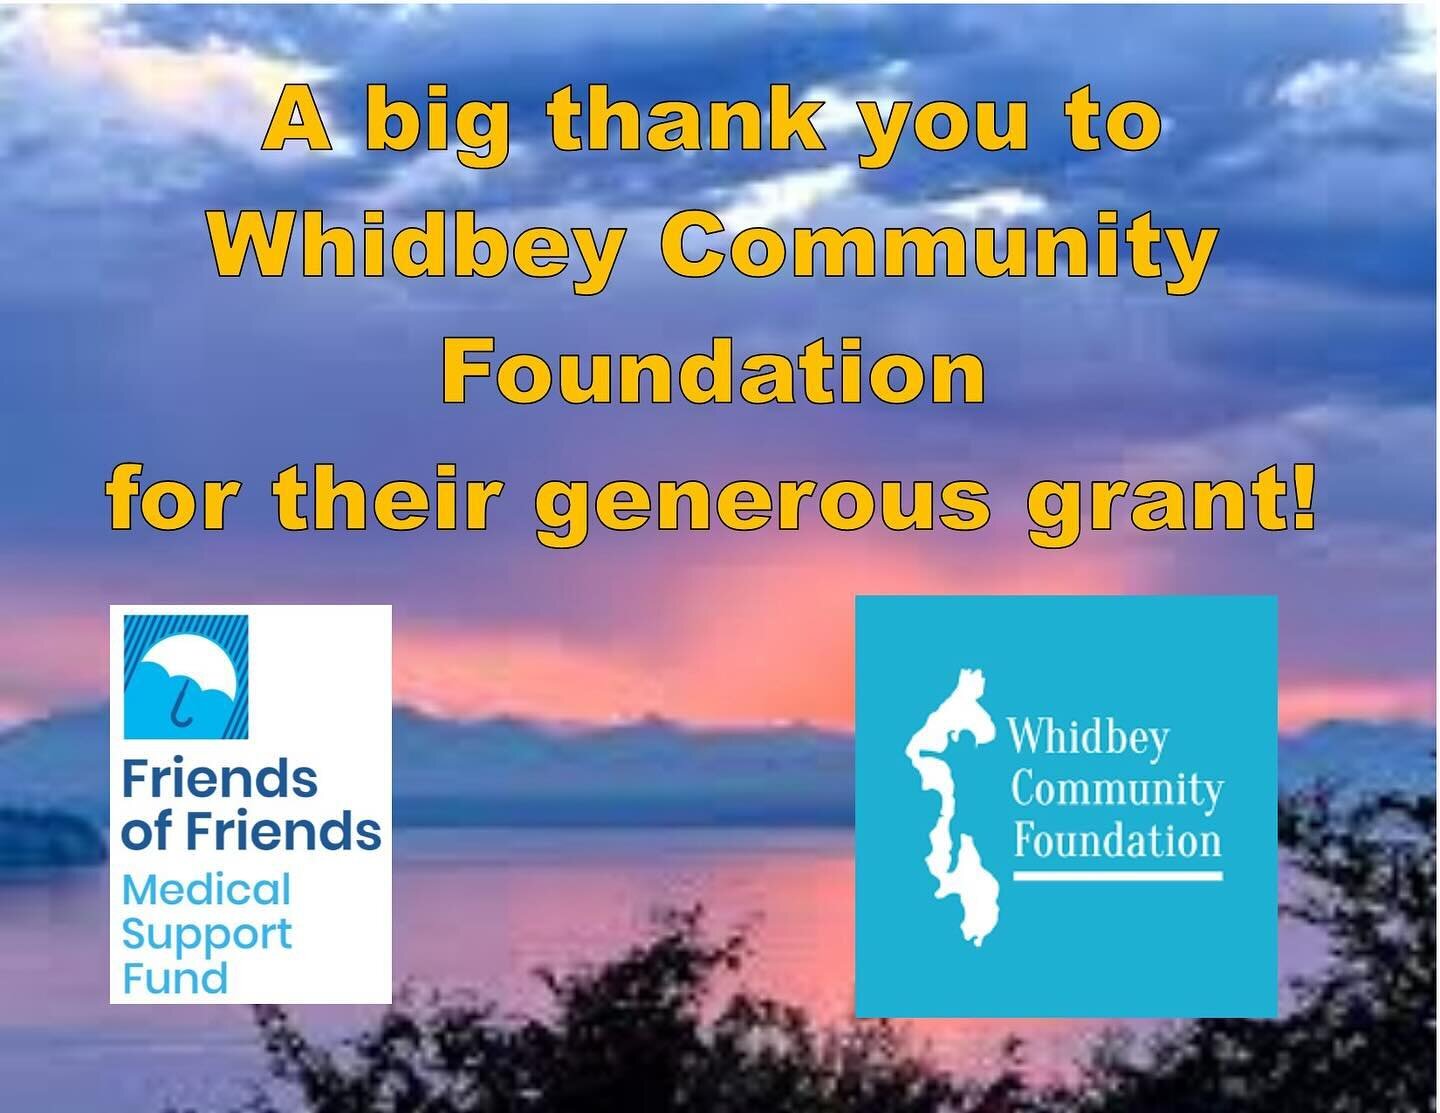 Thank you Whidbey Community Foundation! We appreciate your support and efforts to keep our community healthy and happy!